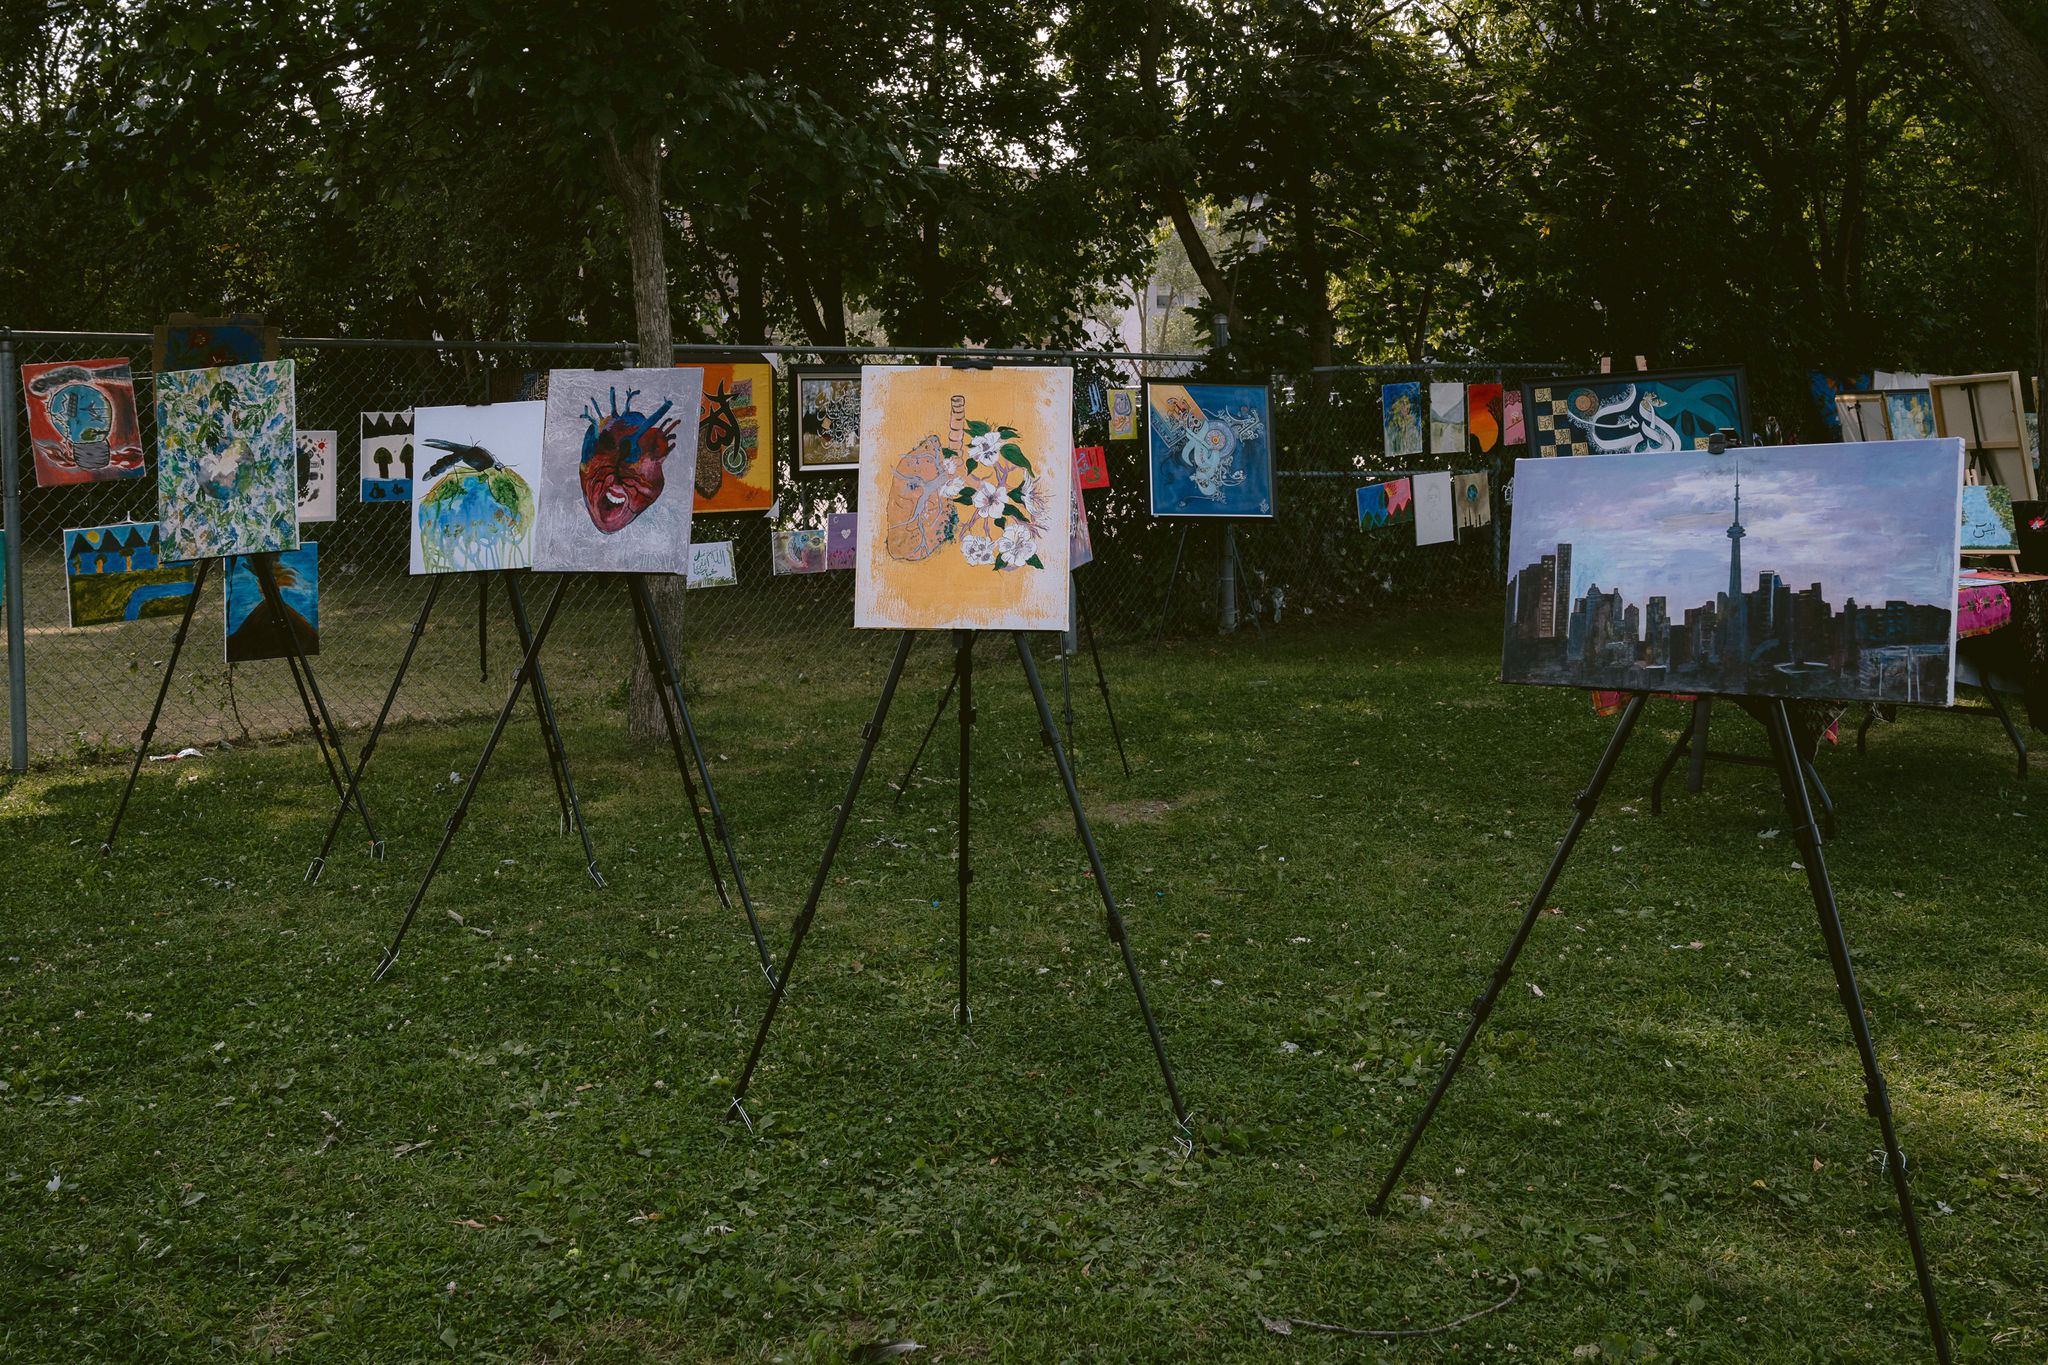 Artworks displayed on easels and fences in the park.